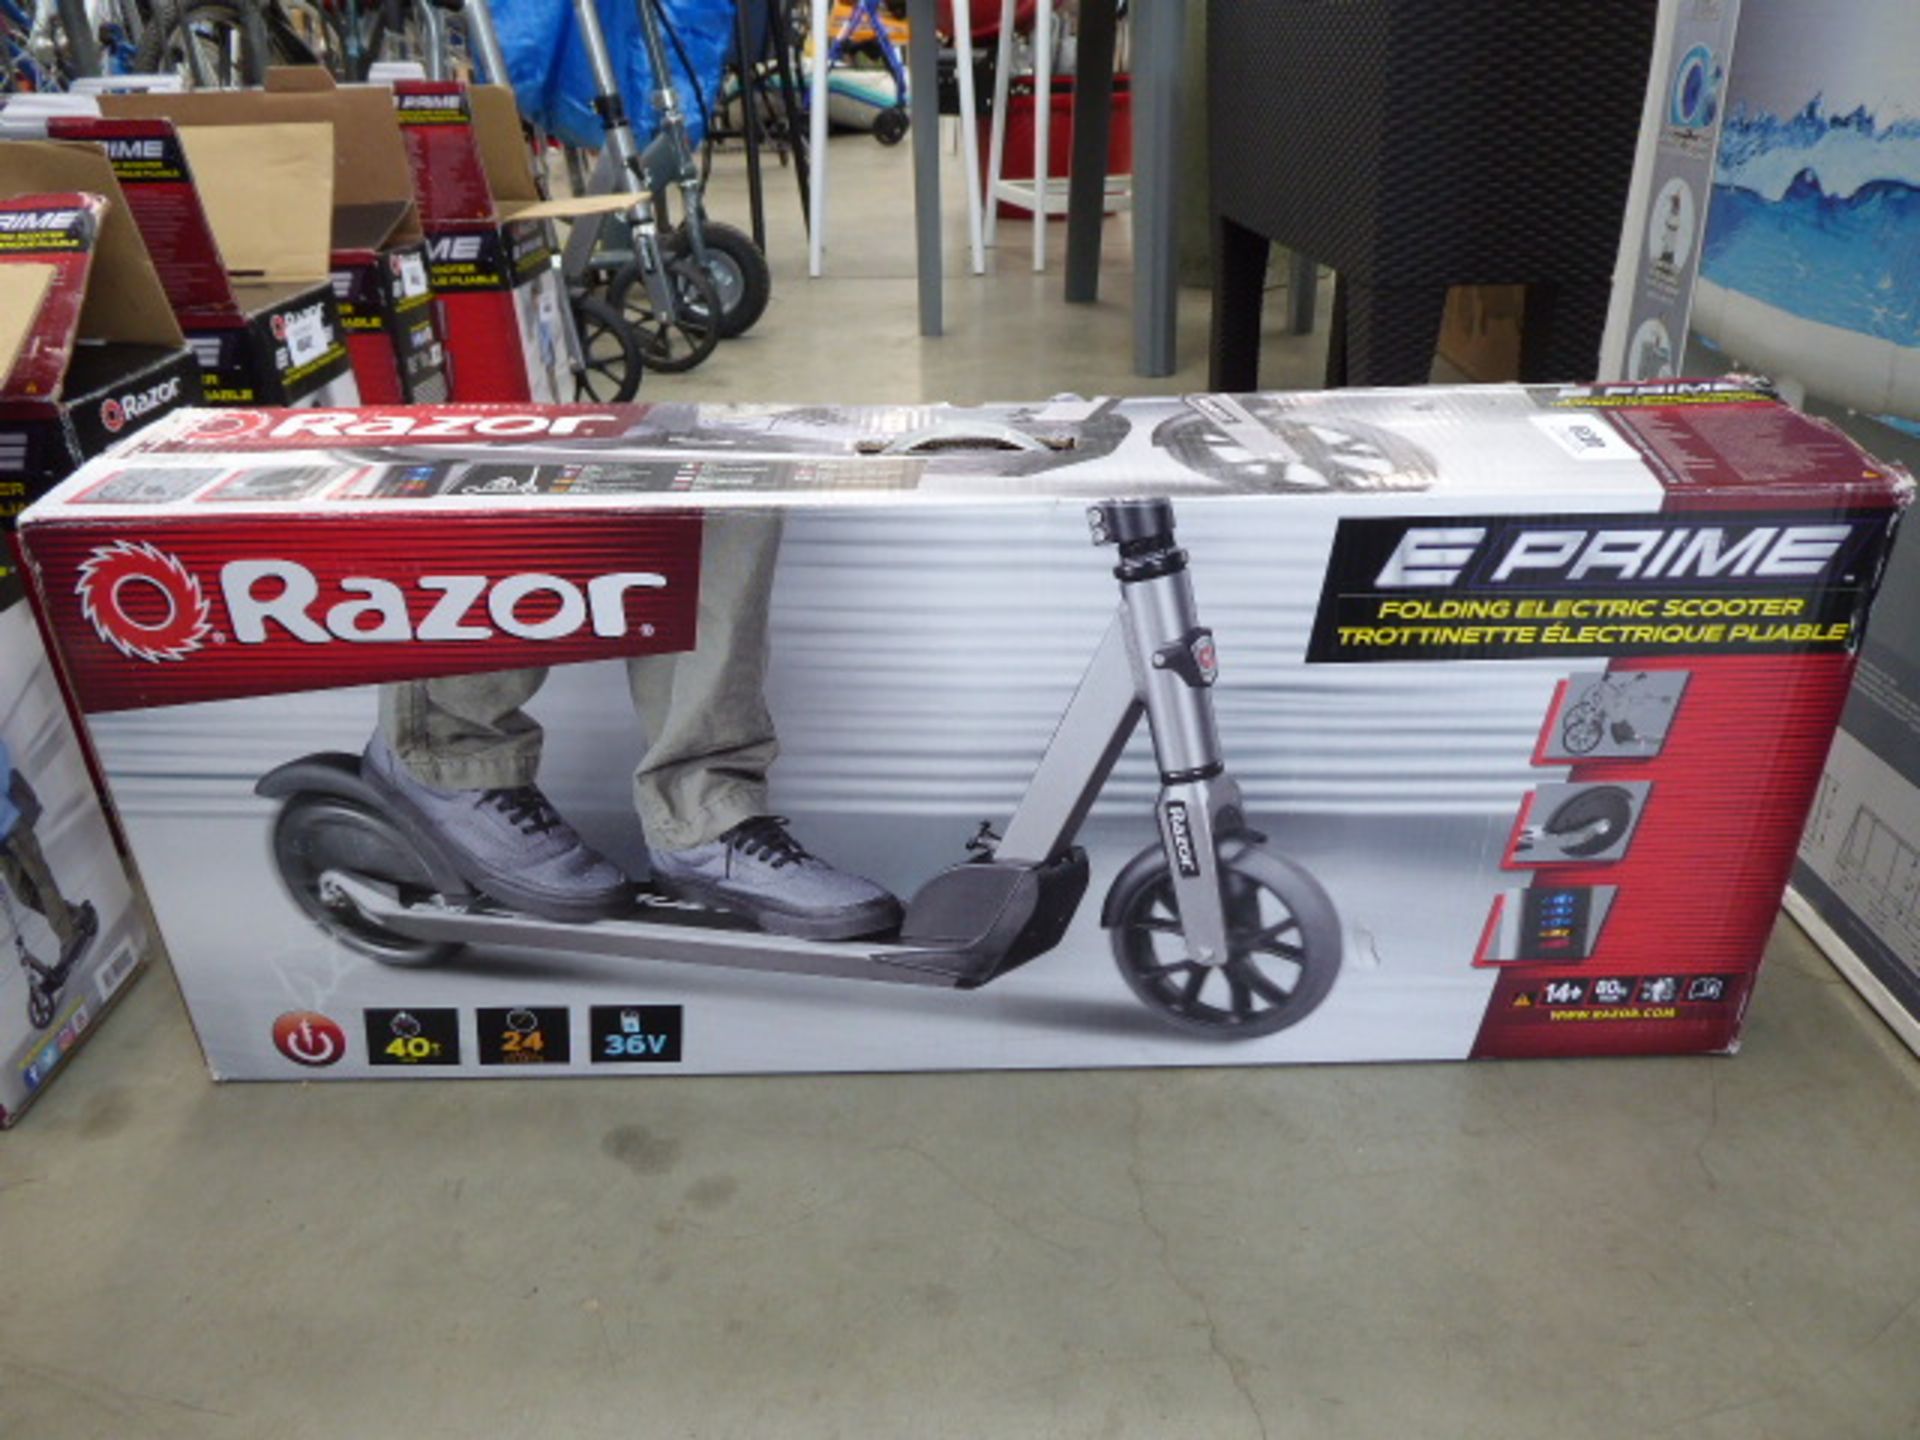 Razor boxed electric scooter with charger